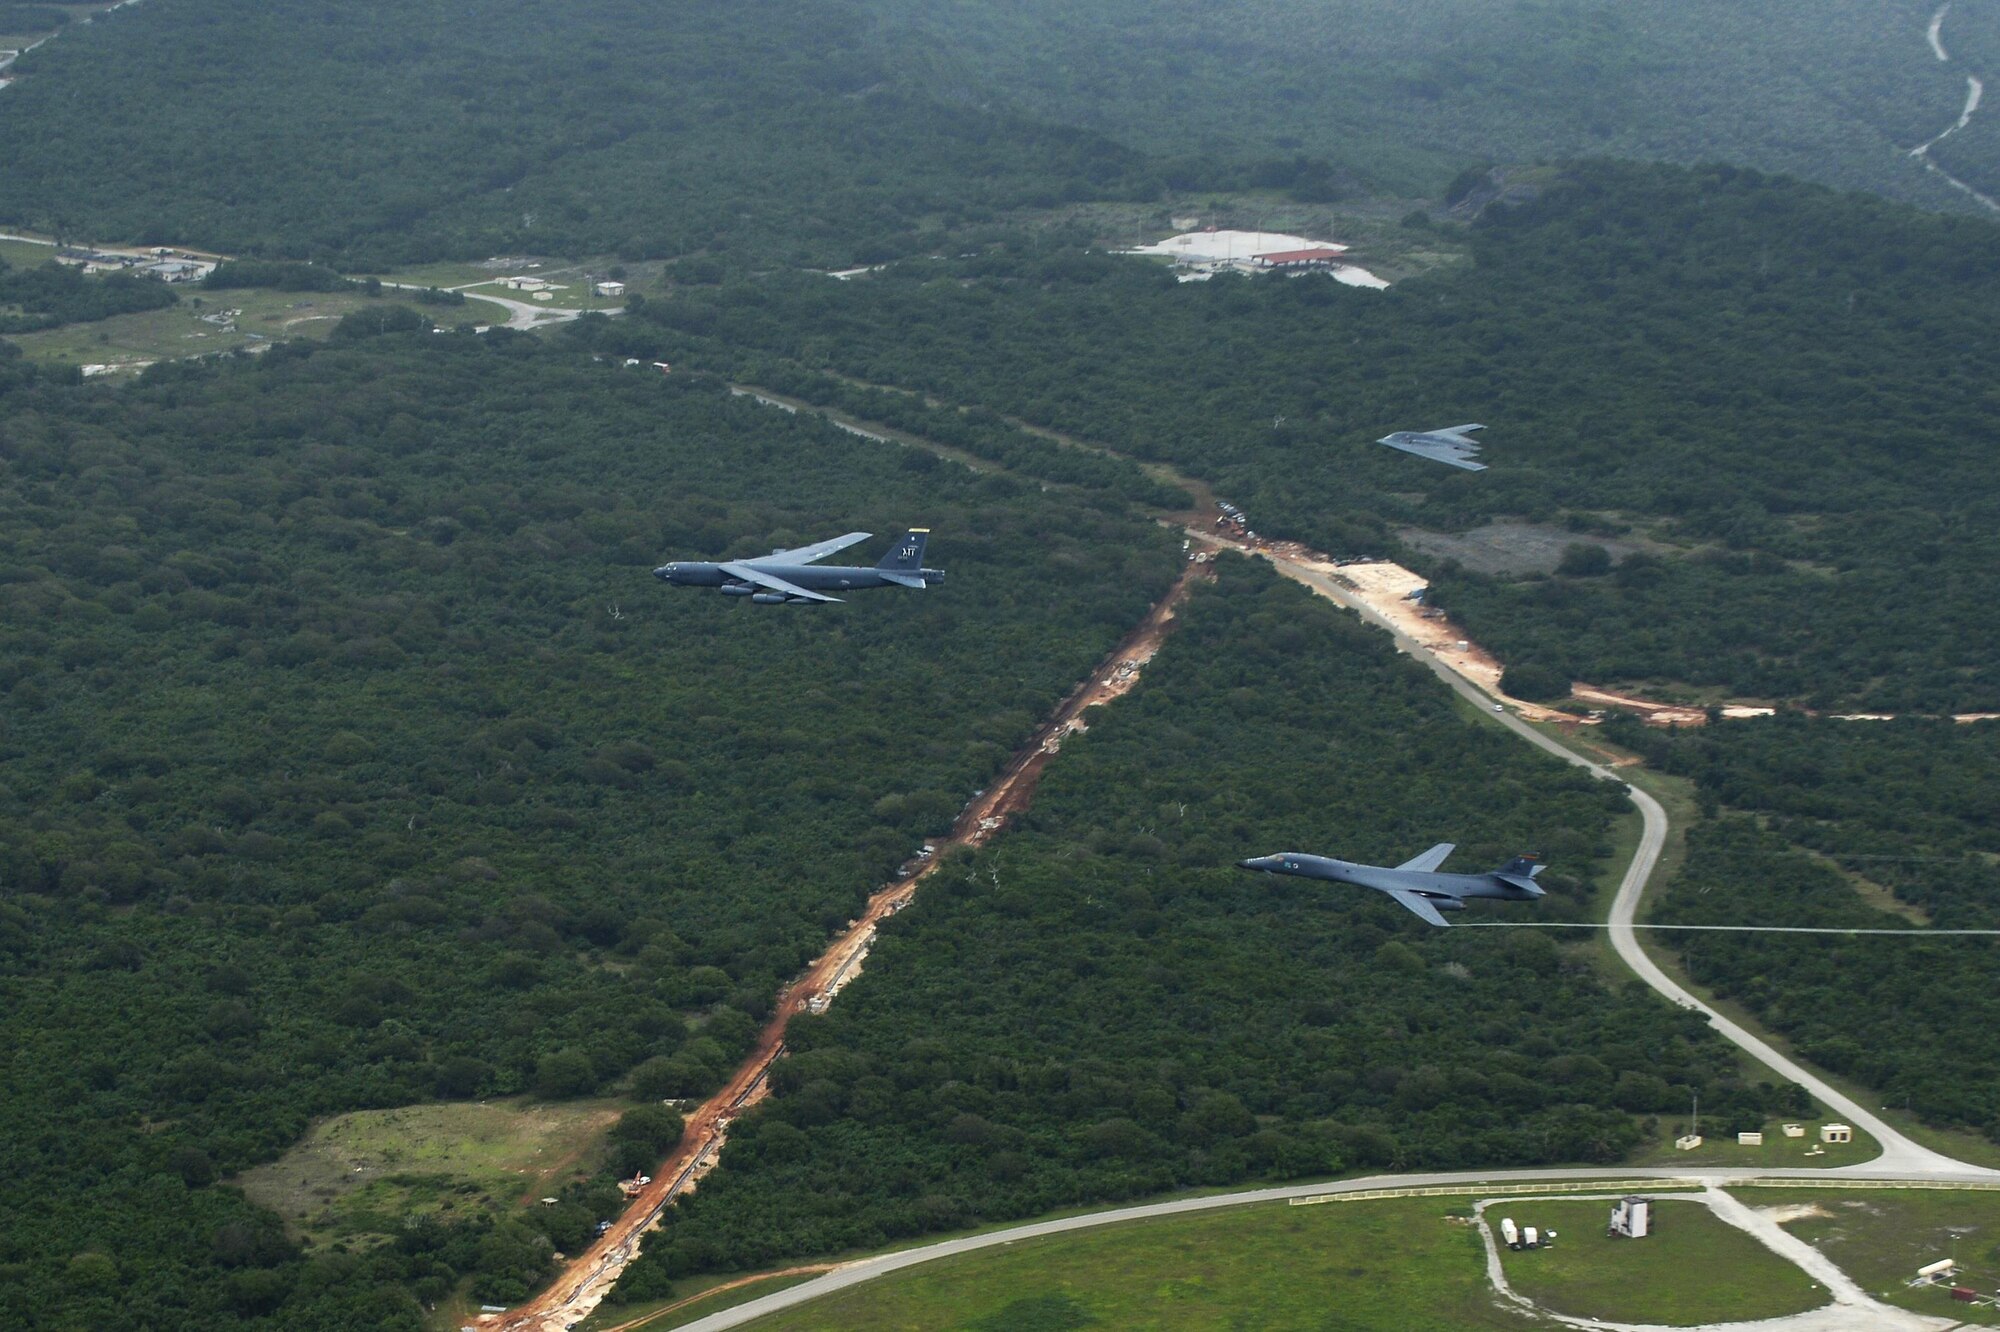 A U.S. Air Force B-52 Stratofortress, B-1 Lancer and B-2 Spirit fly over Guam after launching from Andersen Air Force Base, Guam, for an integrated bomber operation Aug.17, 2016. This mission marks the first time in history that all three of Air Force Global Strike Command's strategic bomber aircraft are simultaneously conducting integrated operations in the U.S. Pacific Command area of operations. As of Aug. 15, the B-1 Lancer will be temporarily deployed to Guam in support of U.S. Pacific Command's Continuous Bomber Presence mission. (U.S. Air Force photo by Staff Sgt. Sandra Welch)